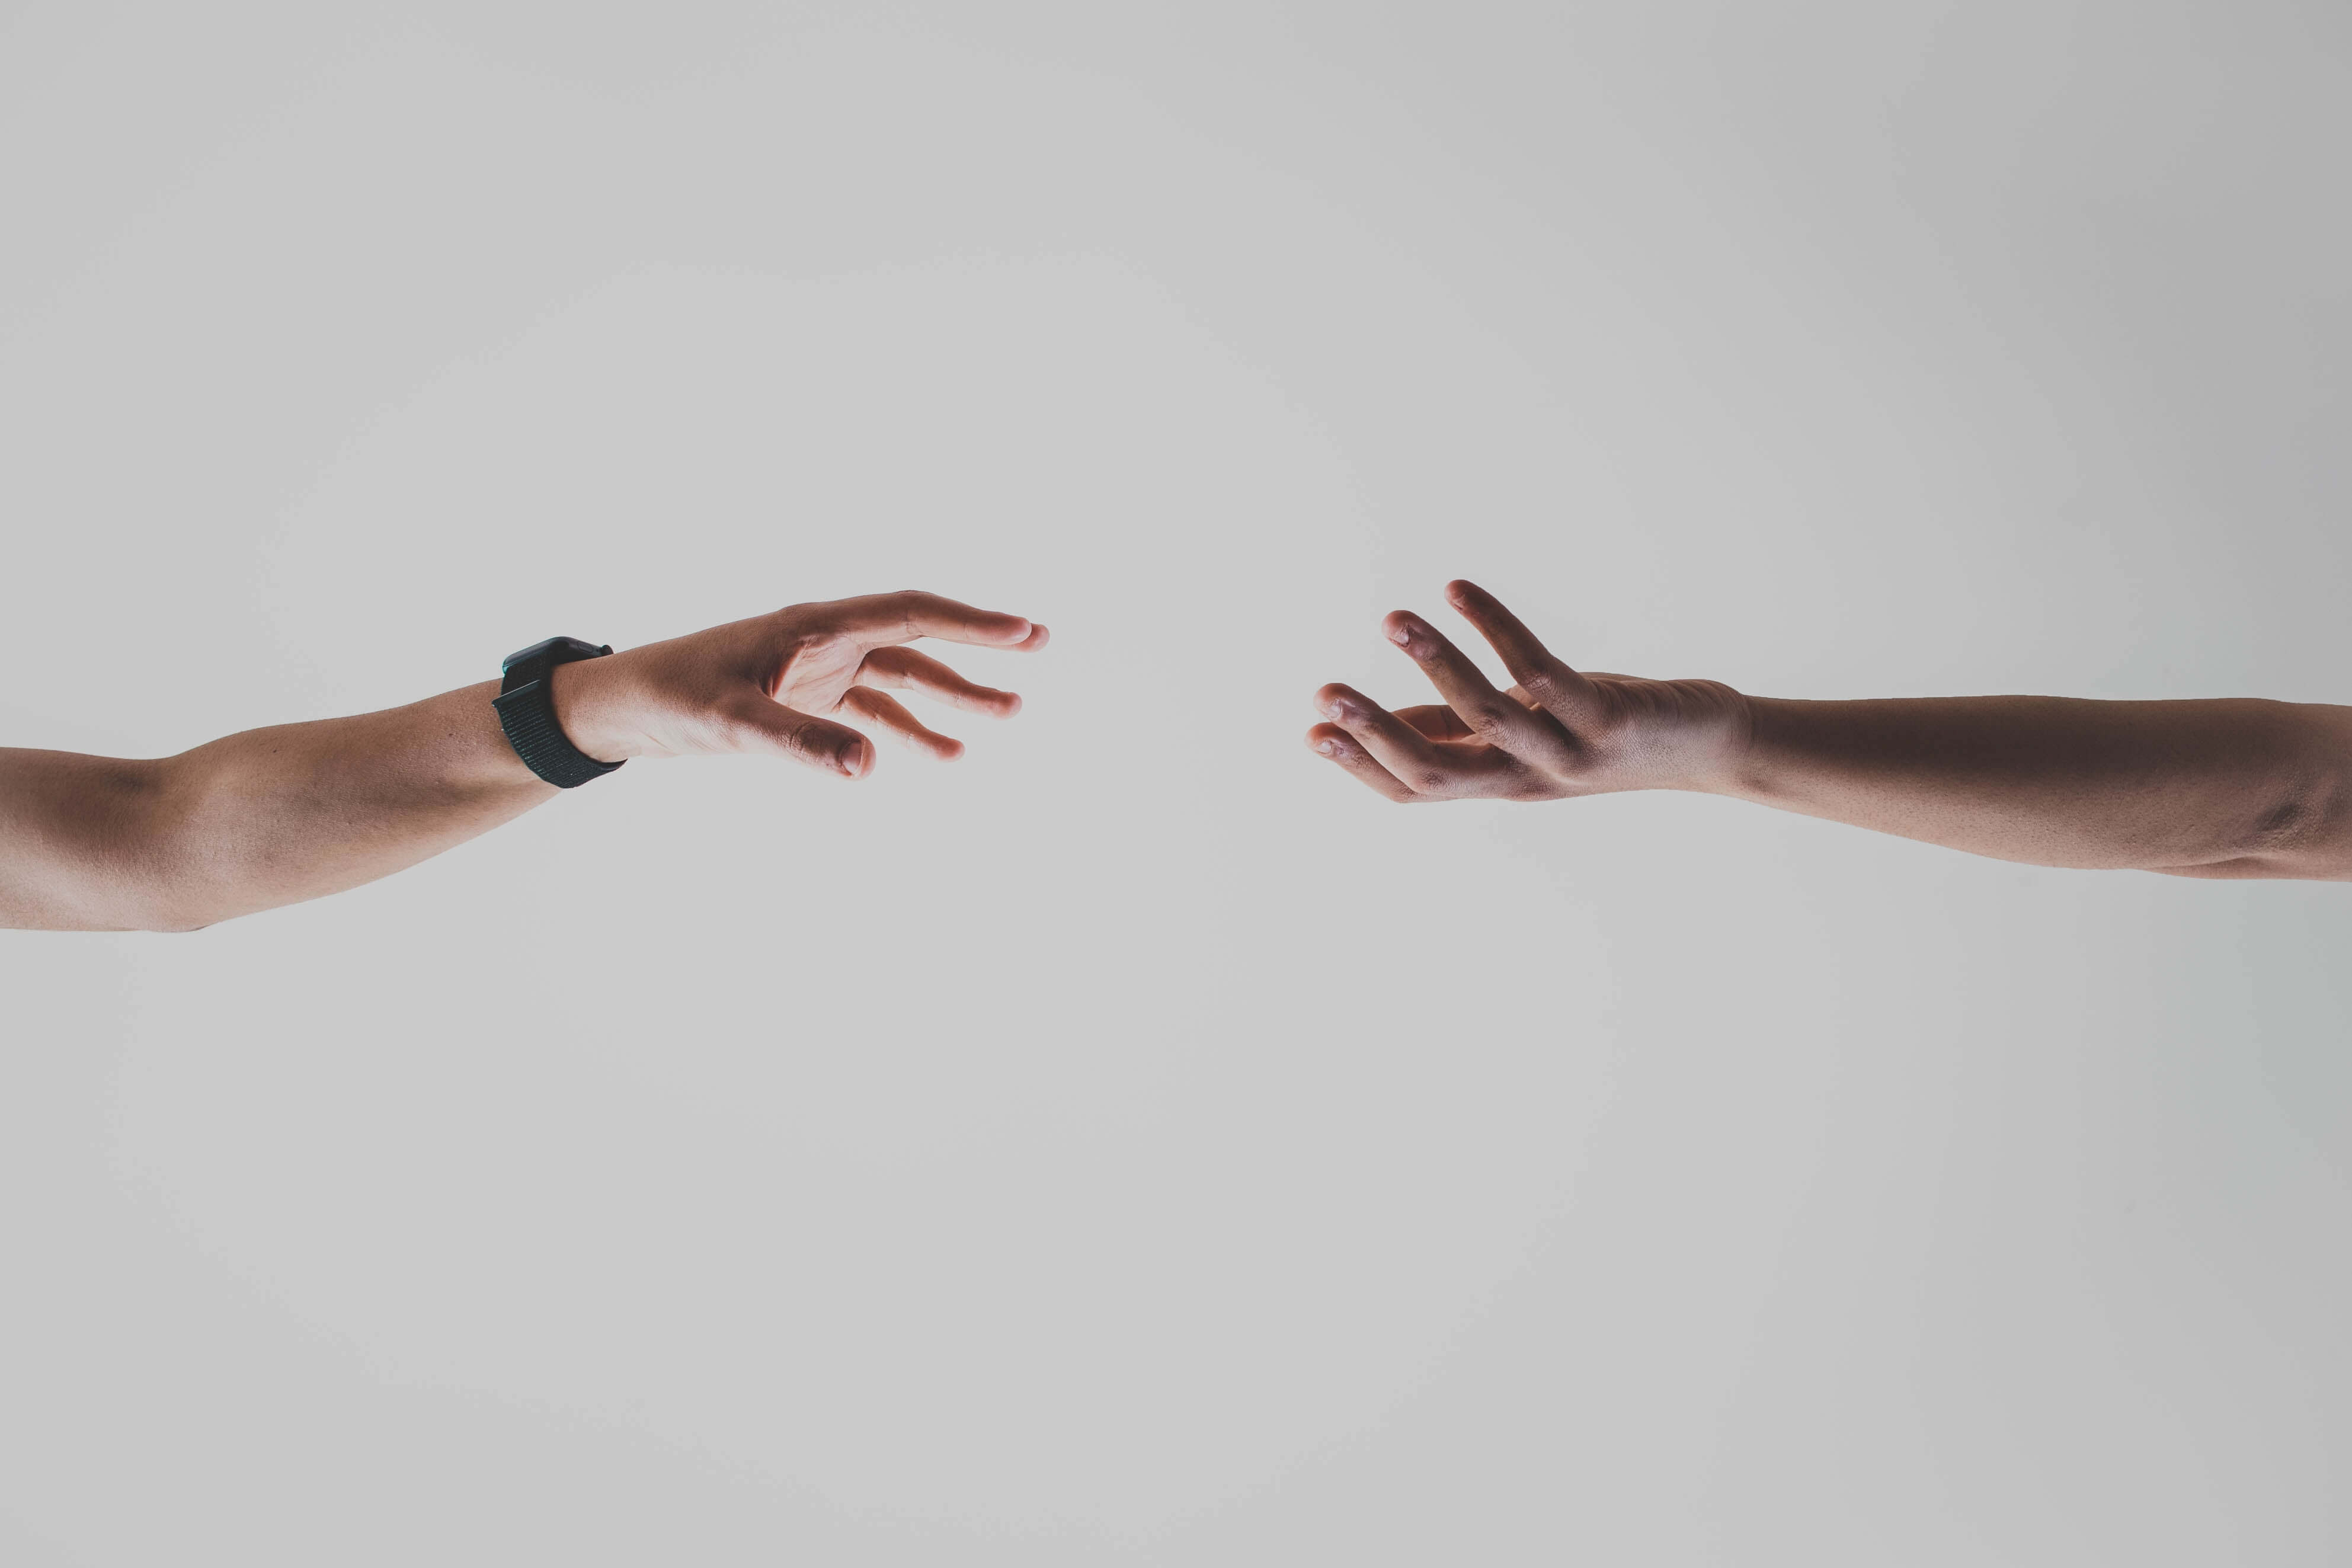 Two hands reaching towards each other against a white background